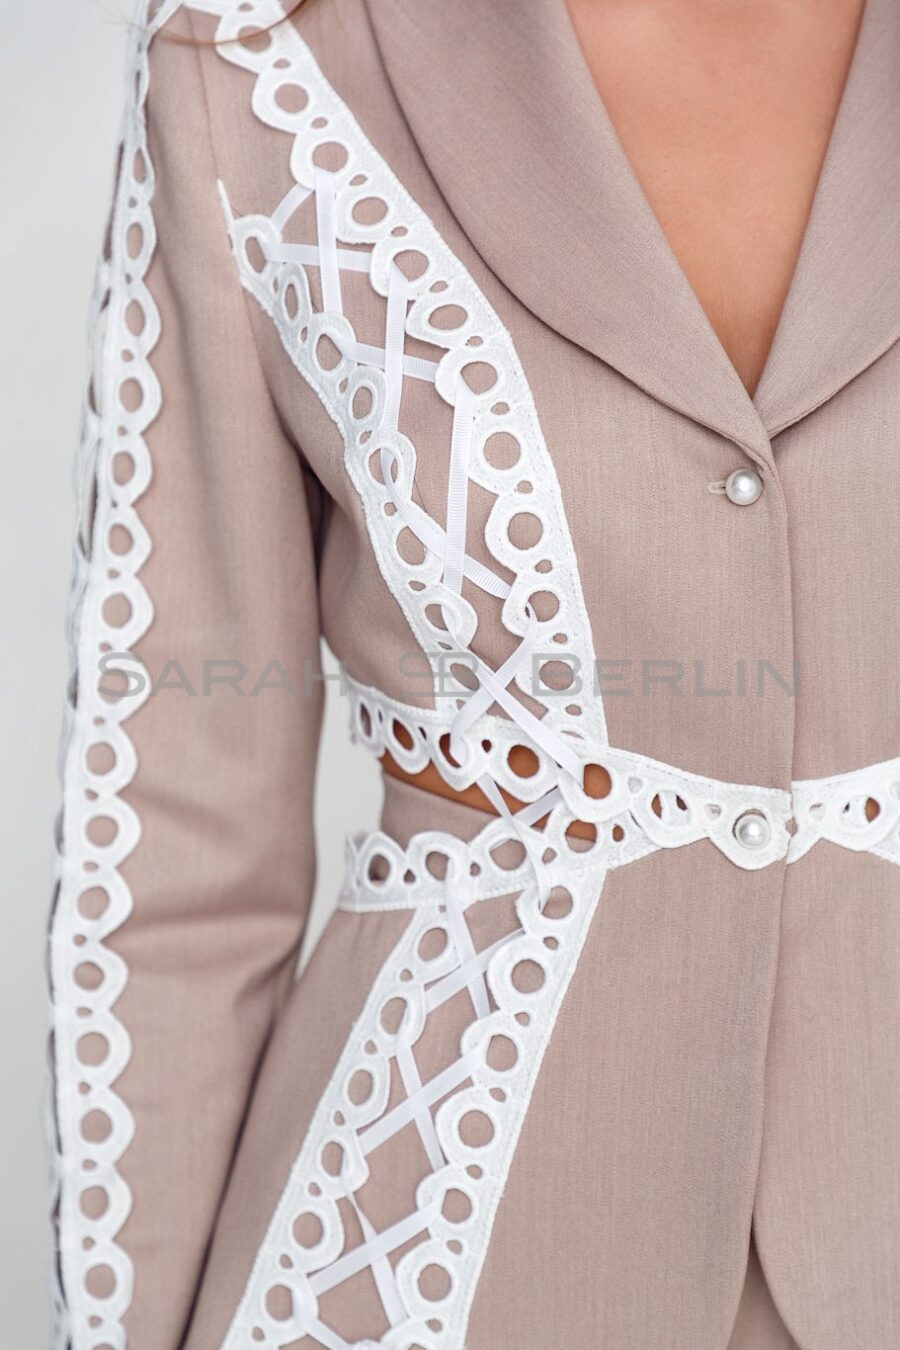 Stylish pants suit with lace and cord